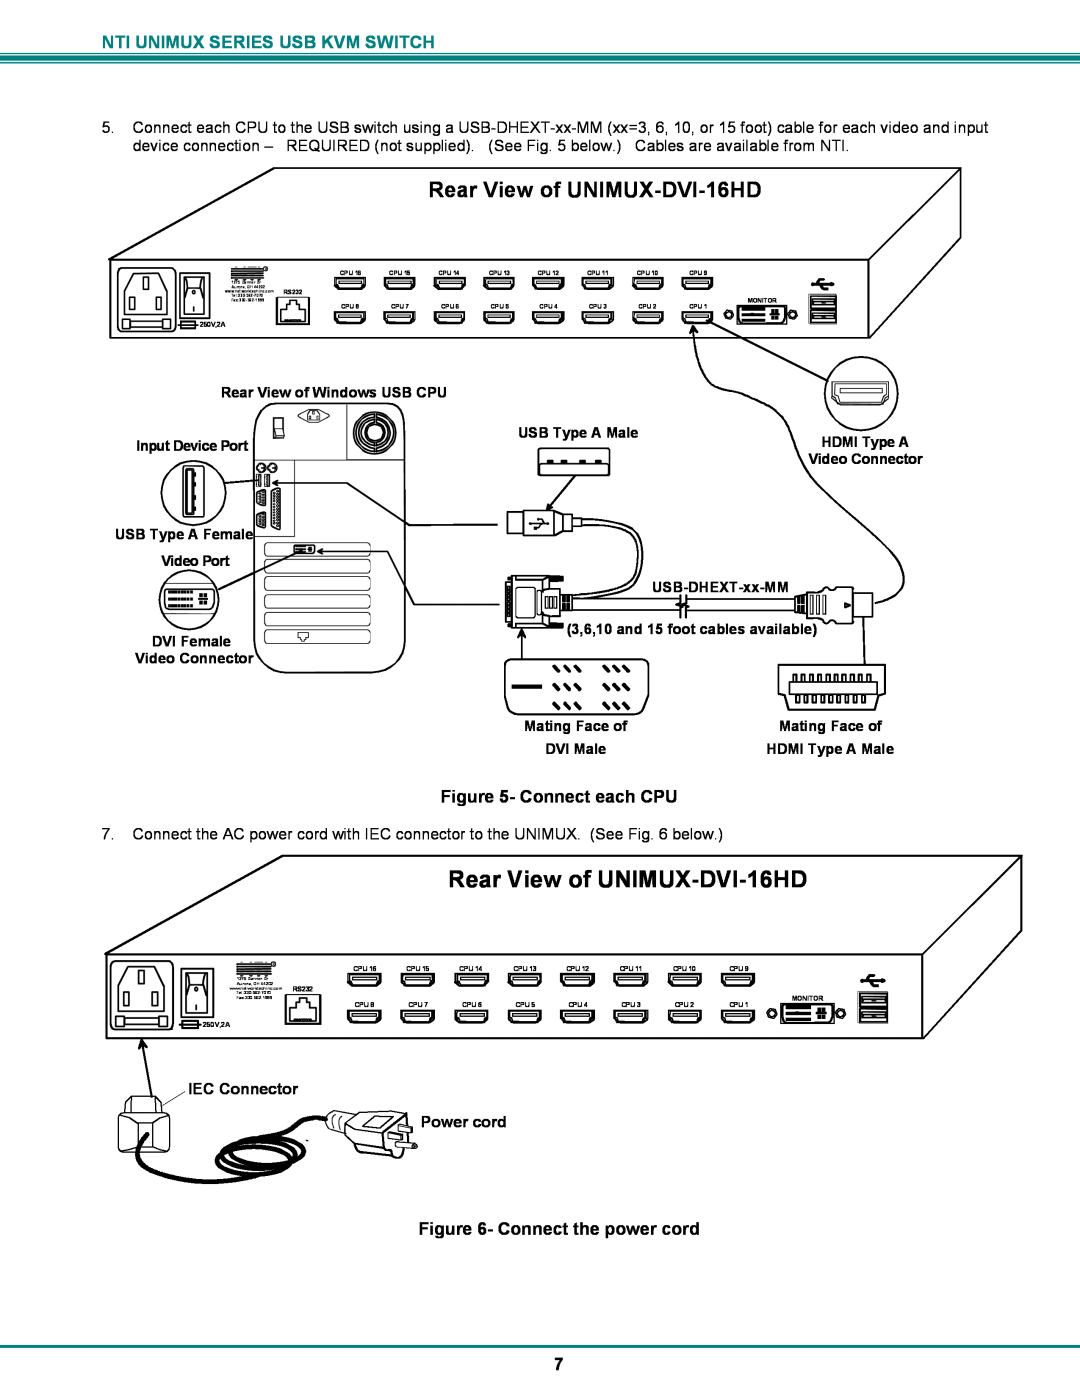 Network Technologies UNIMUX-DVI-xHD operation manual Connect each CPU, Connect the power cord, Rear View of UNIMUX-DVI-16HD 